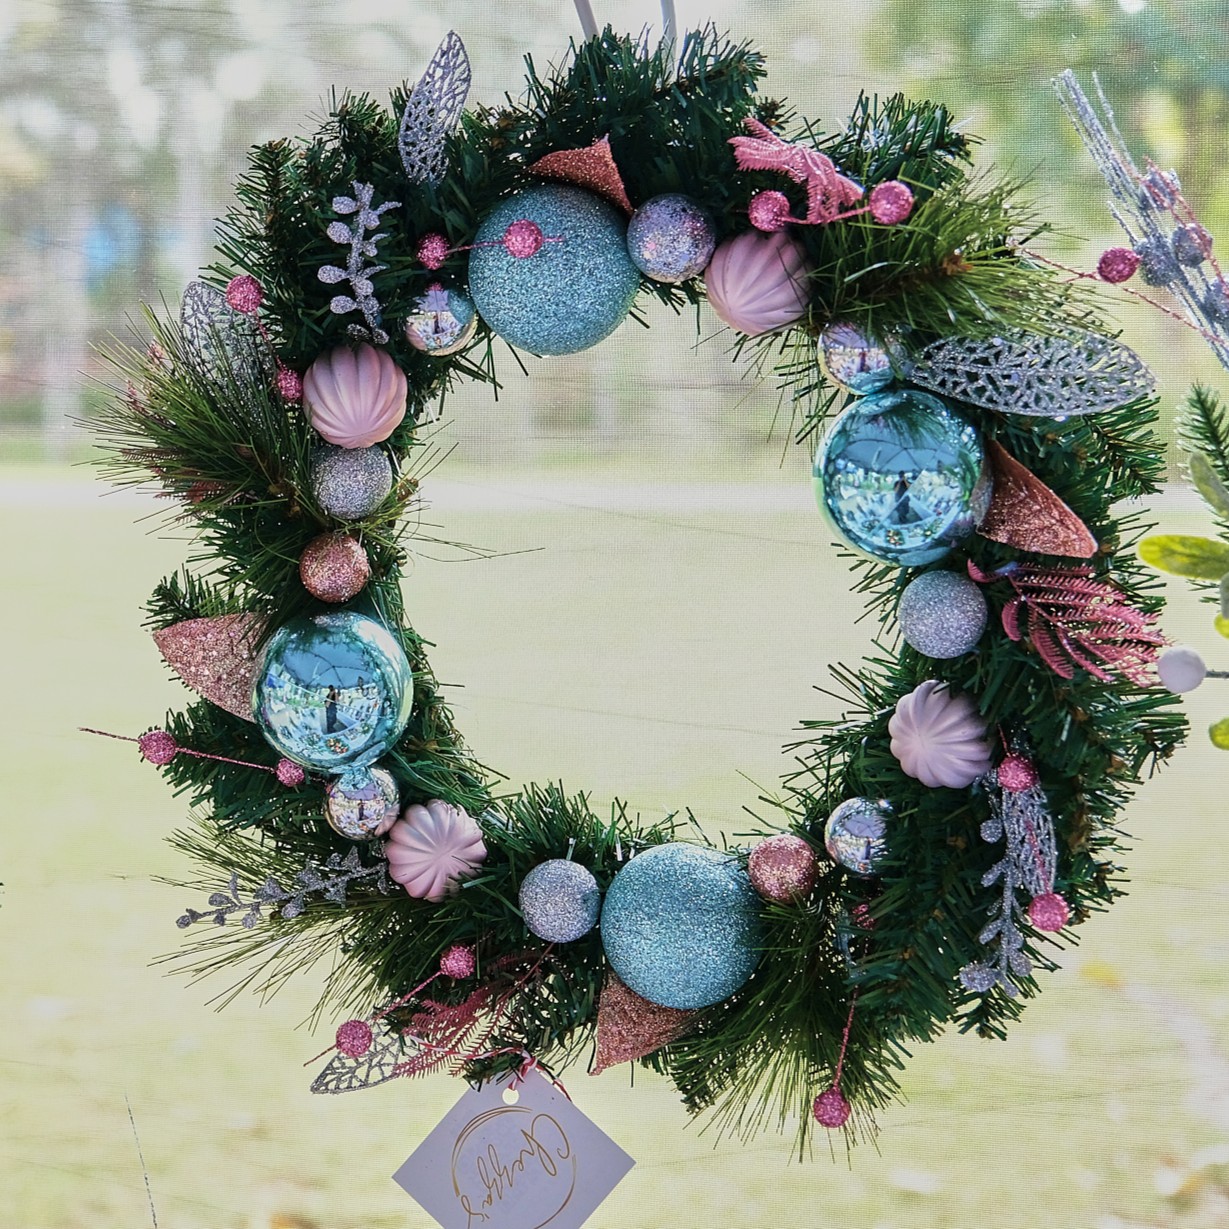 Christmas wreaths by Chezza's (Christmas Factory) are available at the Springfield Markets.